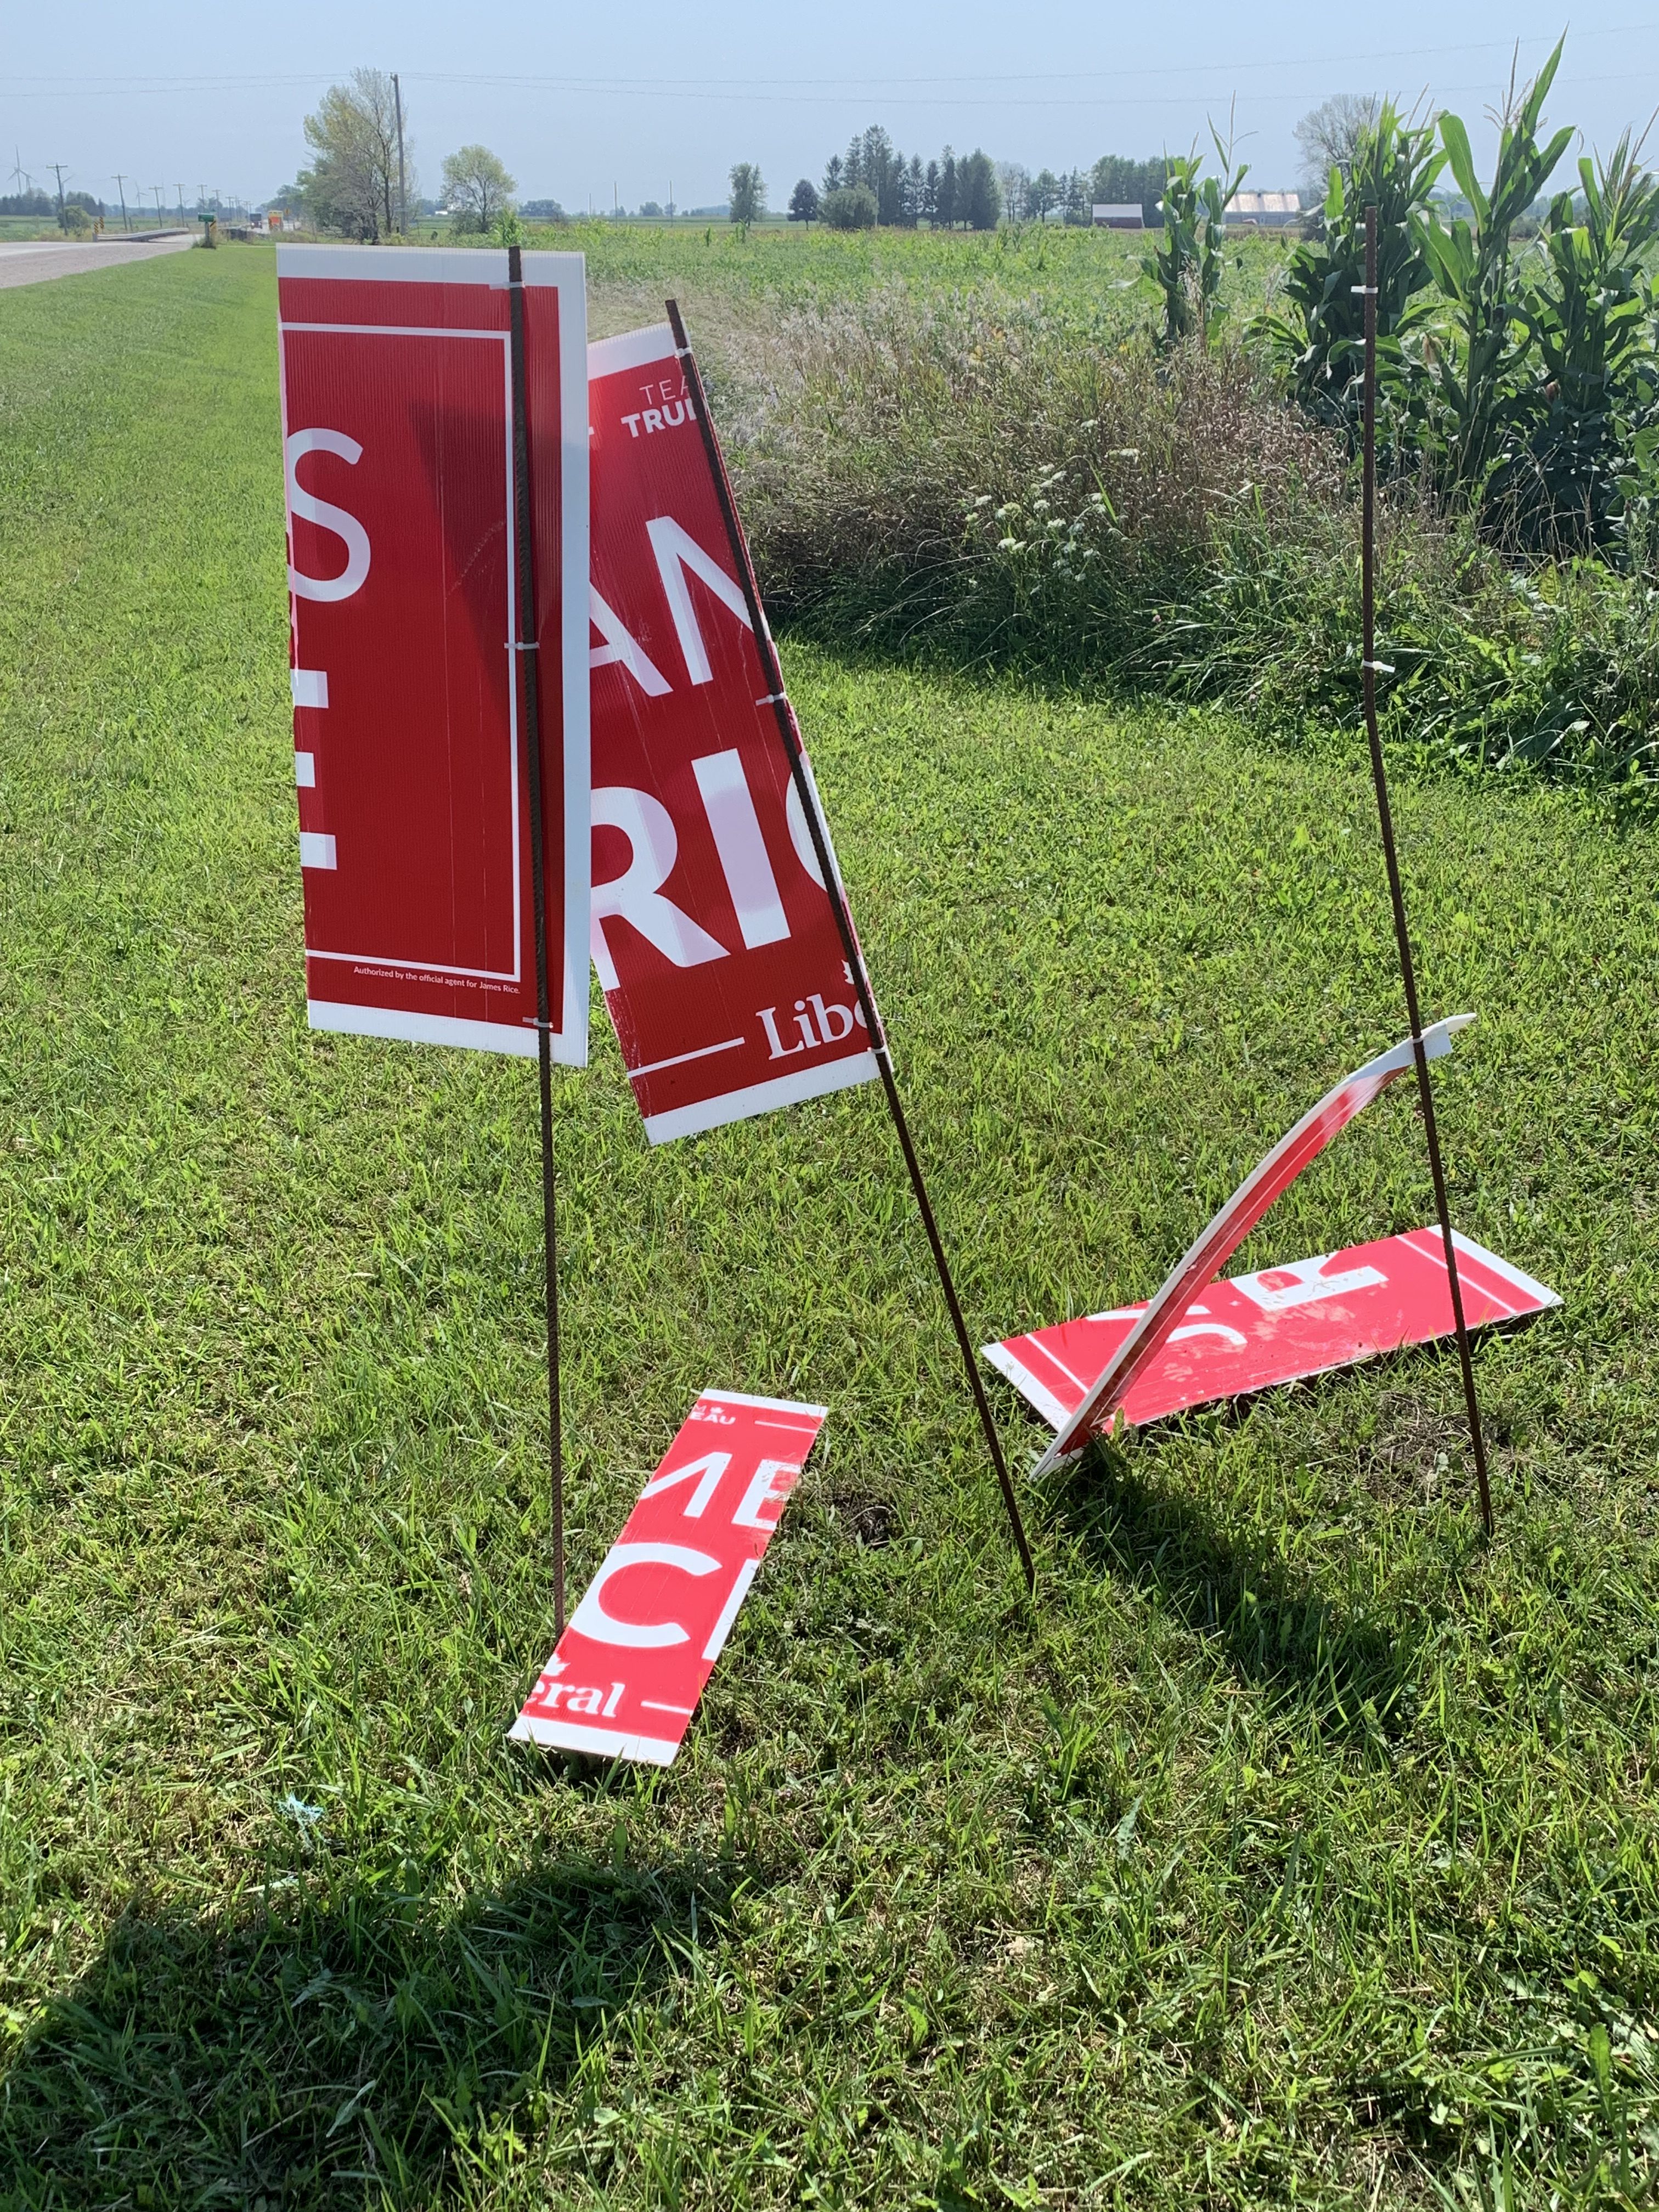 huron opp are investigating election sign vandalism